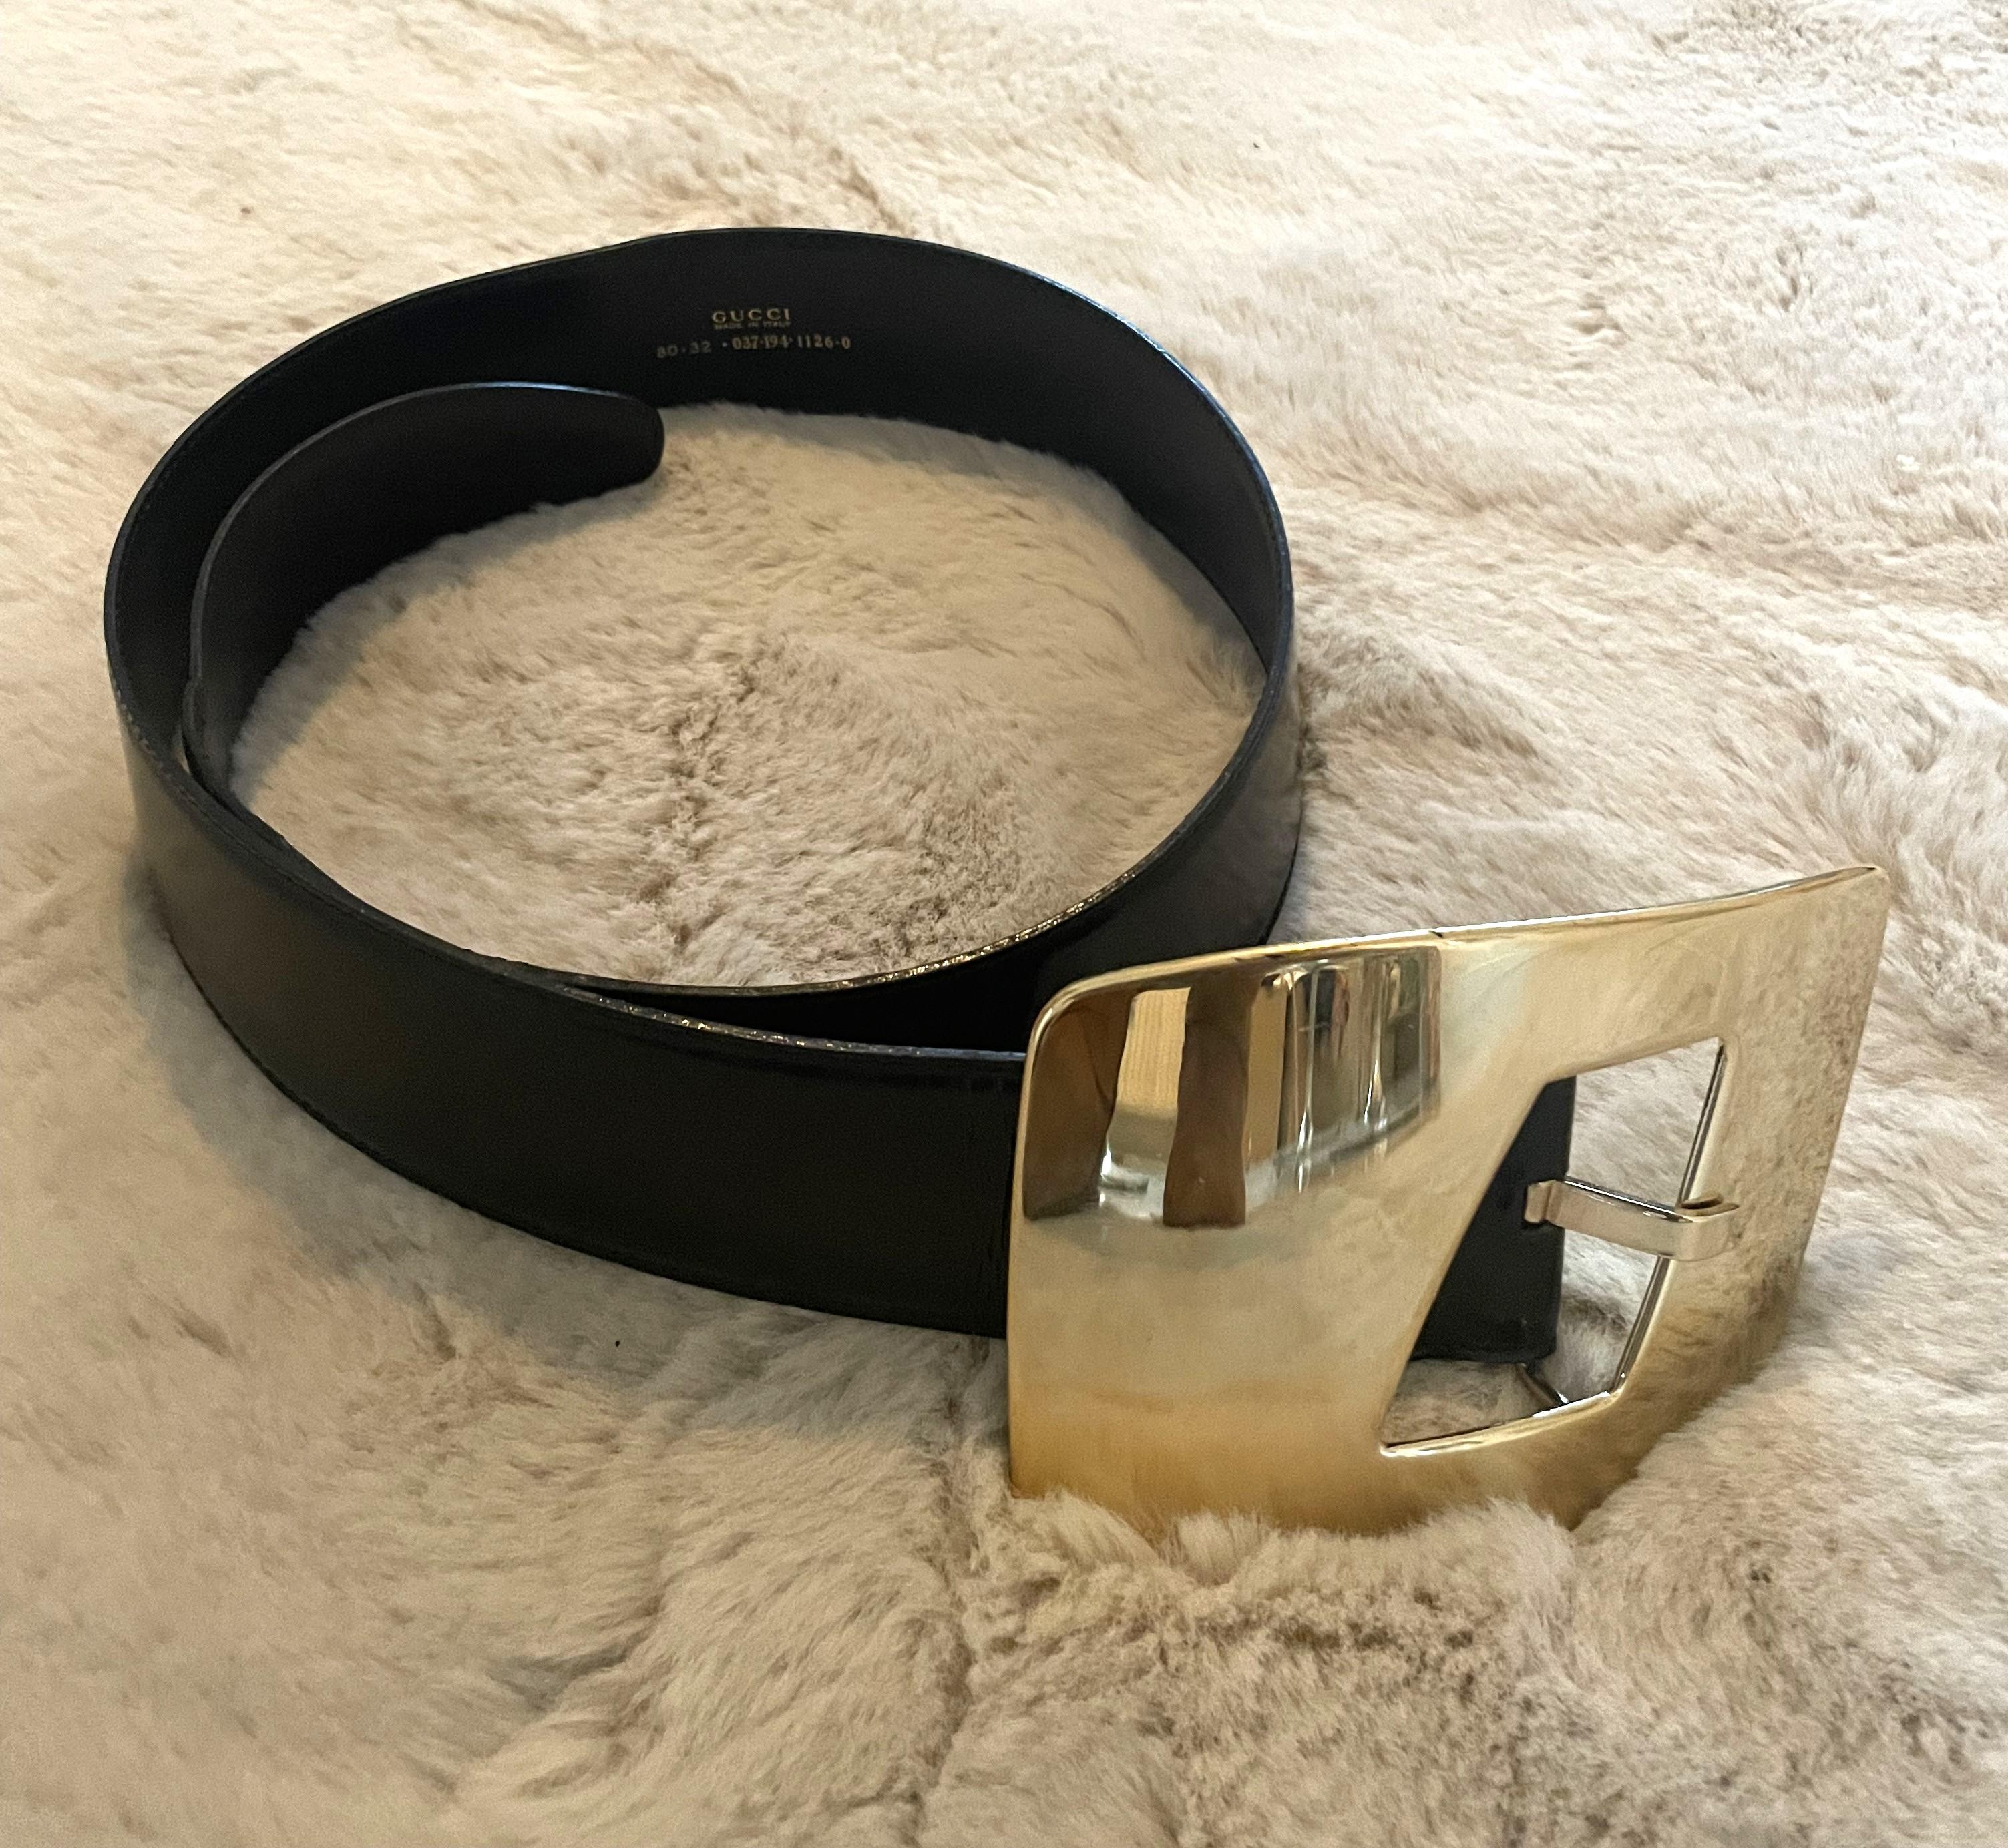 Brown Gucci Belt Black Leather with Gold-plated Oversized Buckle with Gucci logo